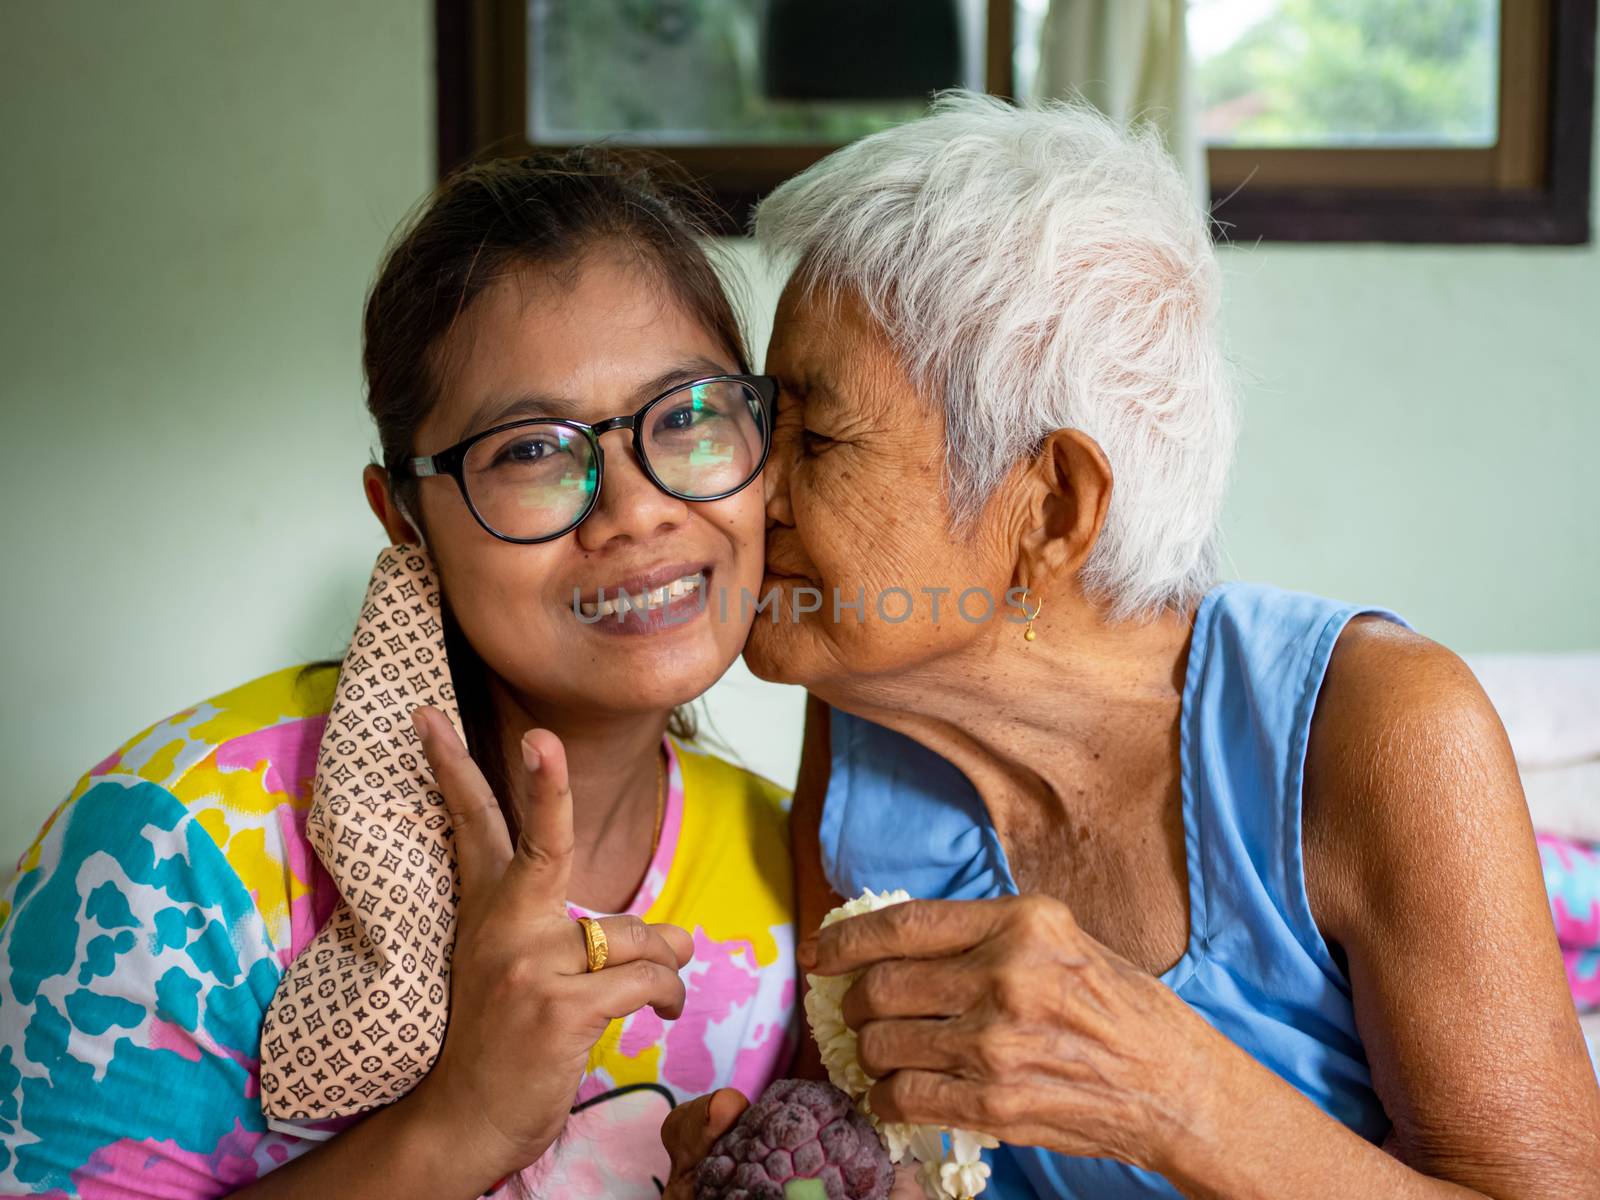 The image of the old woman on the cheek grandchild. real bodies concept.